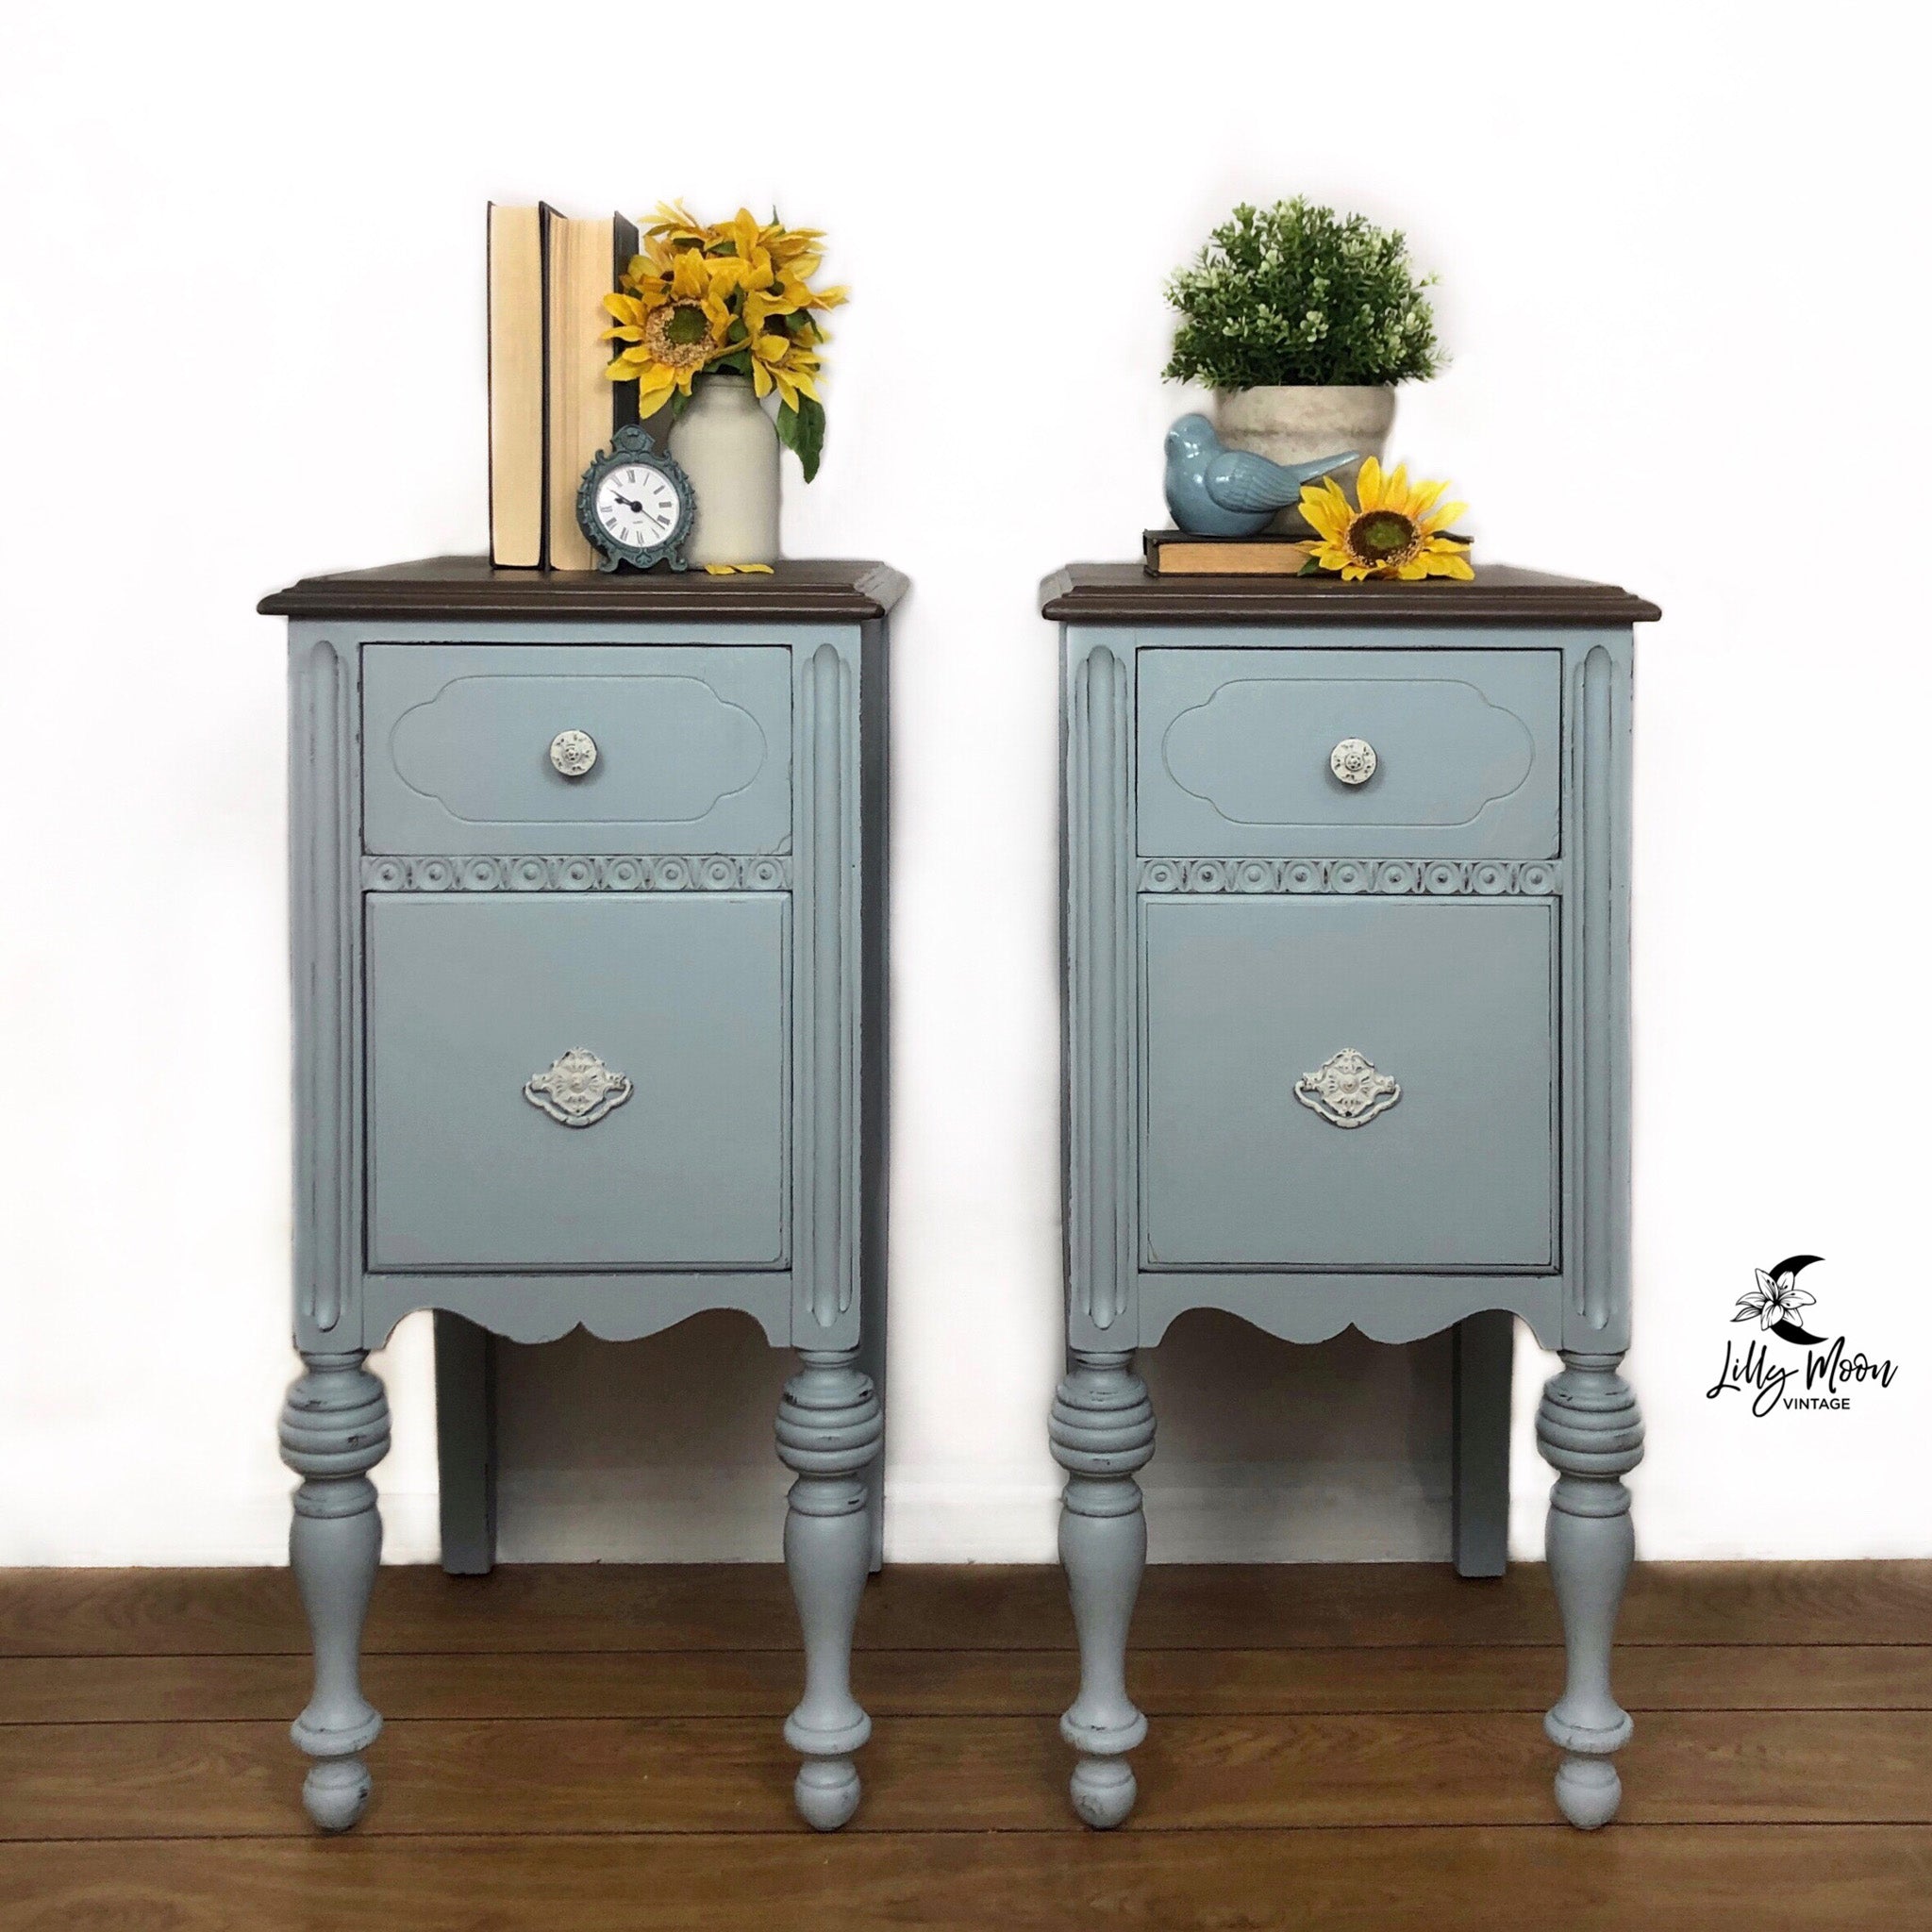 Two vintage nightstands refurbished by Lilly Moon Vintage are painted in Dixie Belle's Savannah Mist chalk mineral paint and have down brown tops.